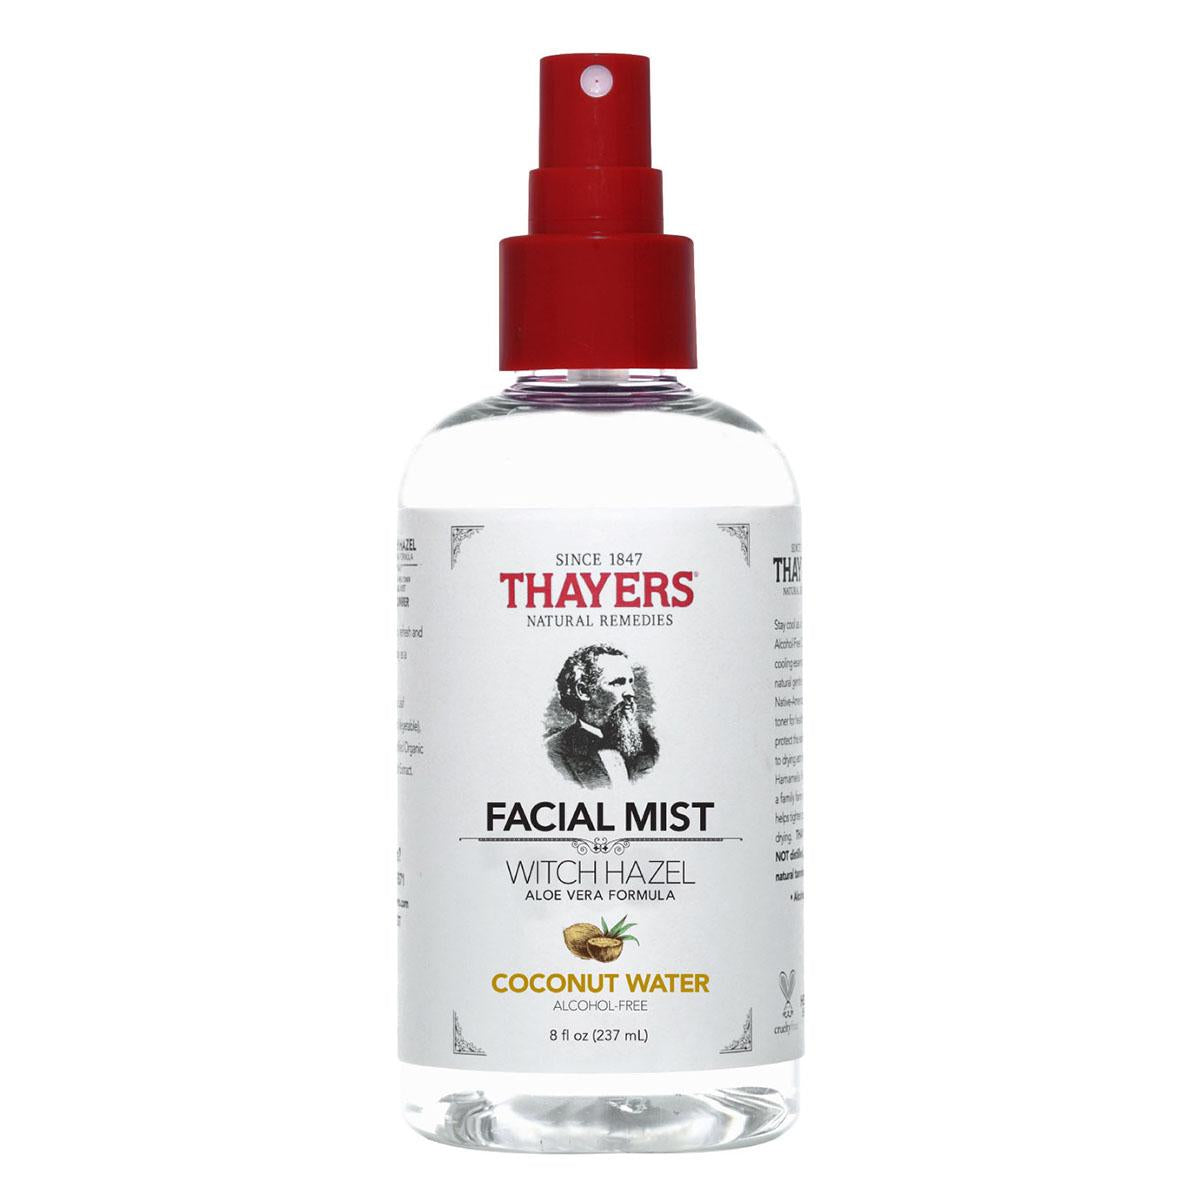 Primary image of Coconut Water Facial Mist